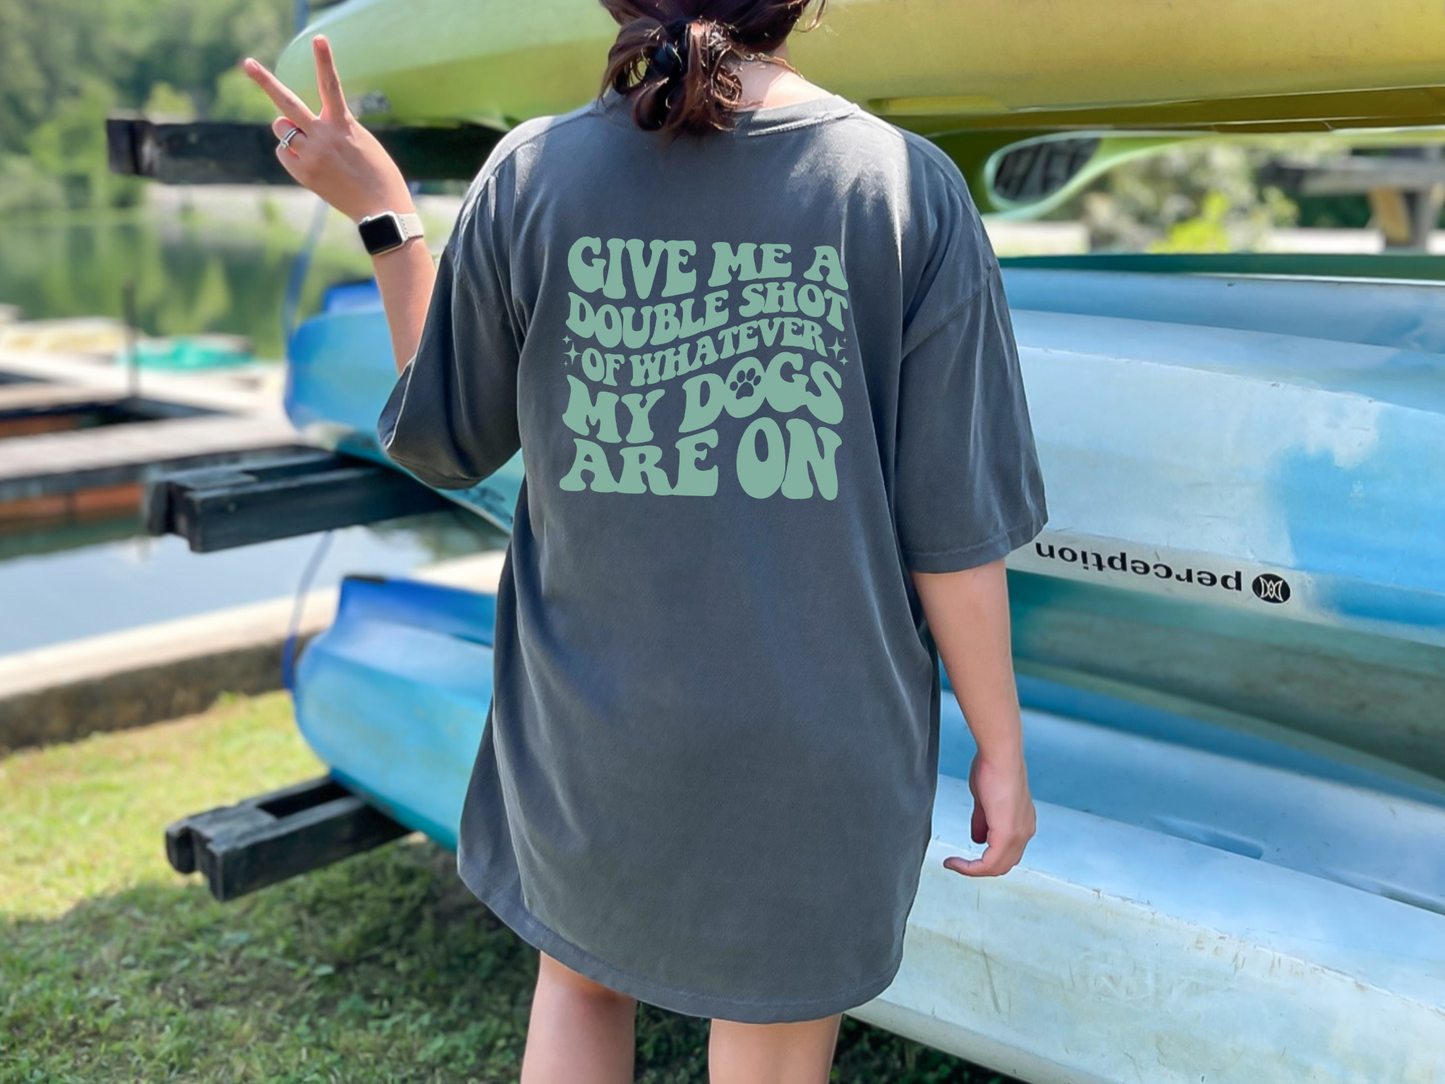 Give me a double shot... Printed T-shirt